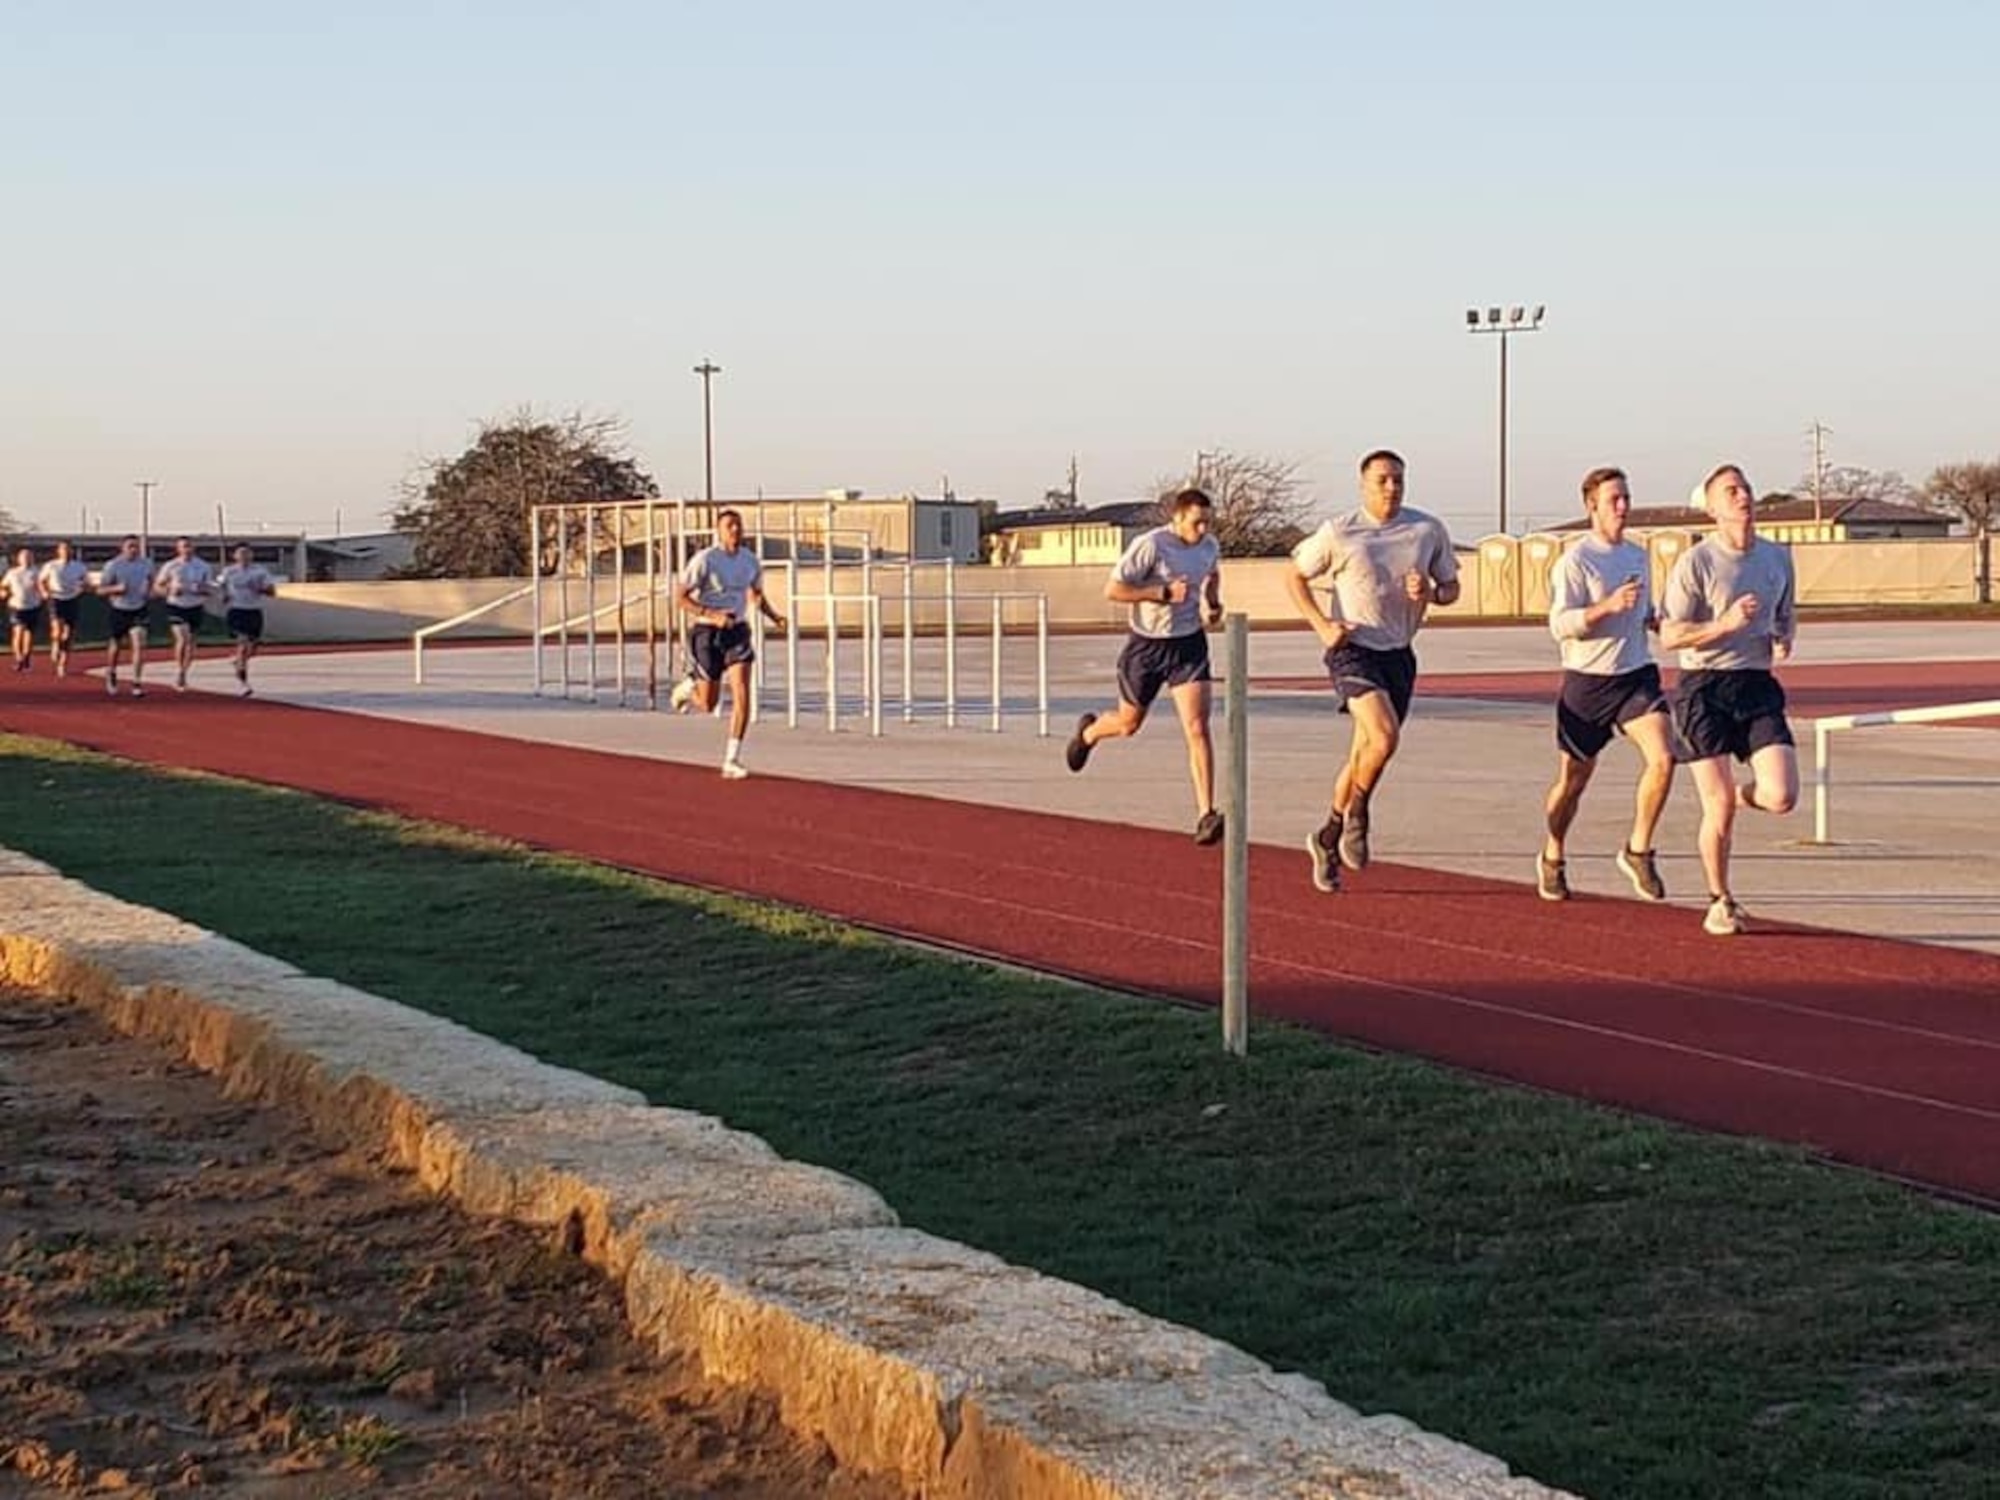 Security Forces Airmen take part in the run portion of a physical fitness test as the opening day of the Air Education and Training Command Defender Challenge team tryout at Joint Base San Antonio-Lackland, Texas, Jan. 27, 2020. The five-day selection camp includes a physical fitness test, M-9 and M-4 weapons firing, the alpha warrior obstacle course, a ruck march and also includes a military working dog tryout as well.